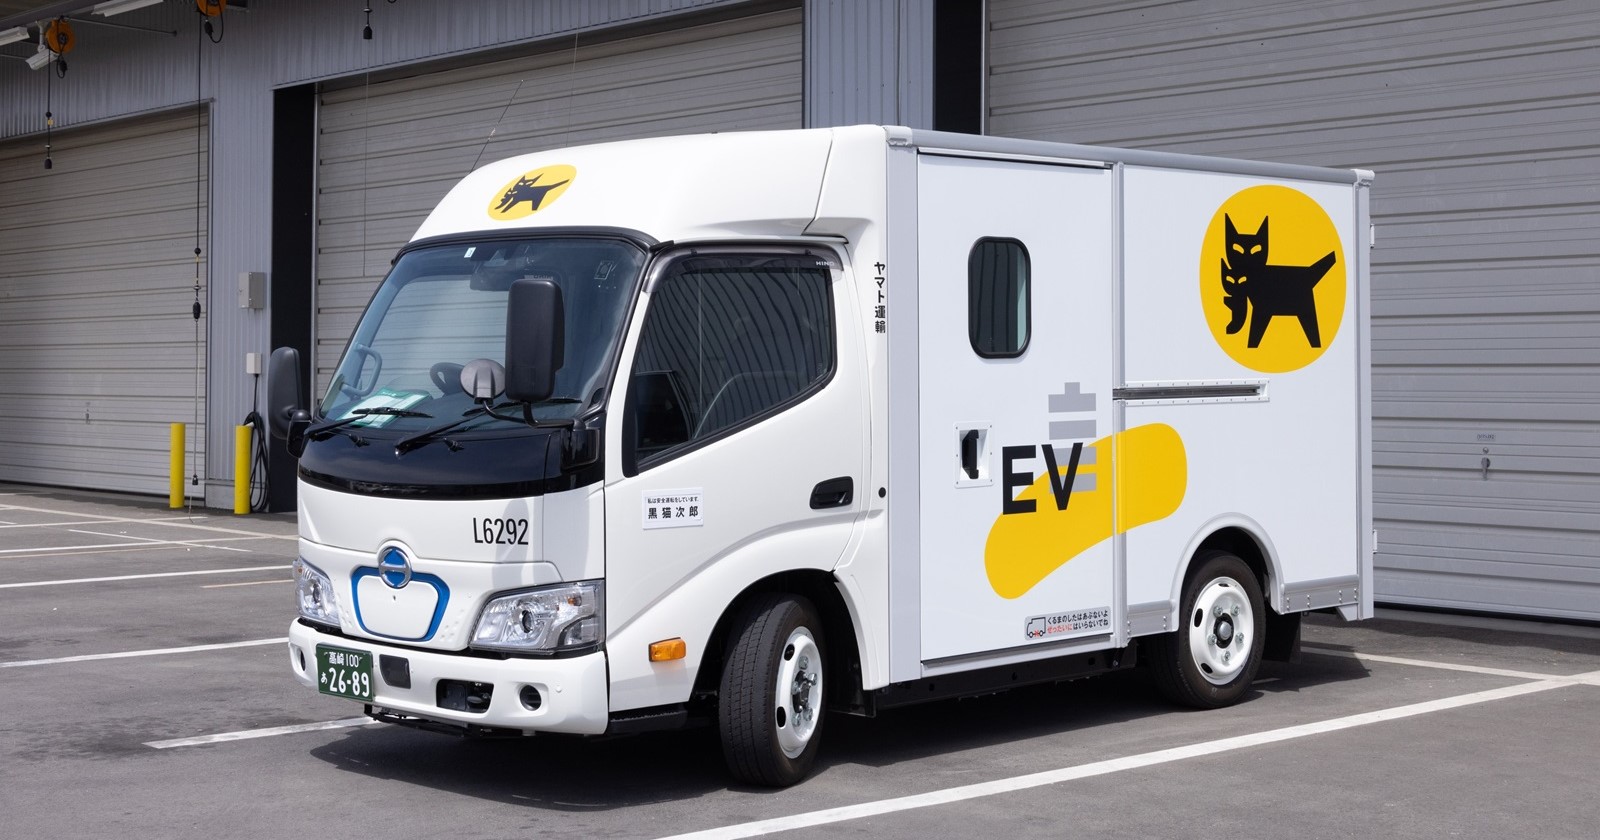 Google Store switches to Yamato Transport for Pixel shipping in Japan